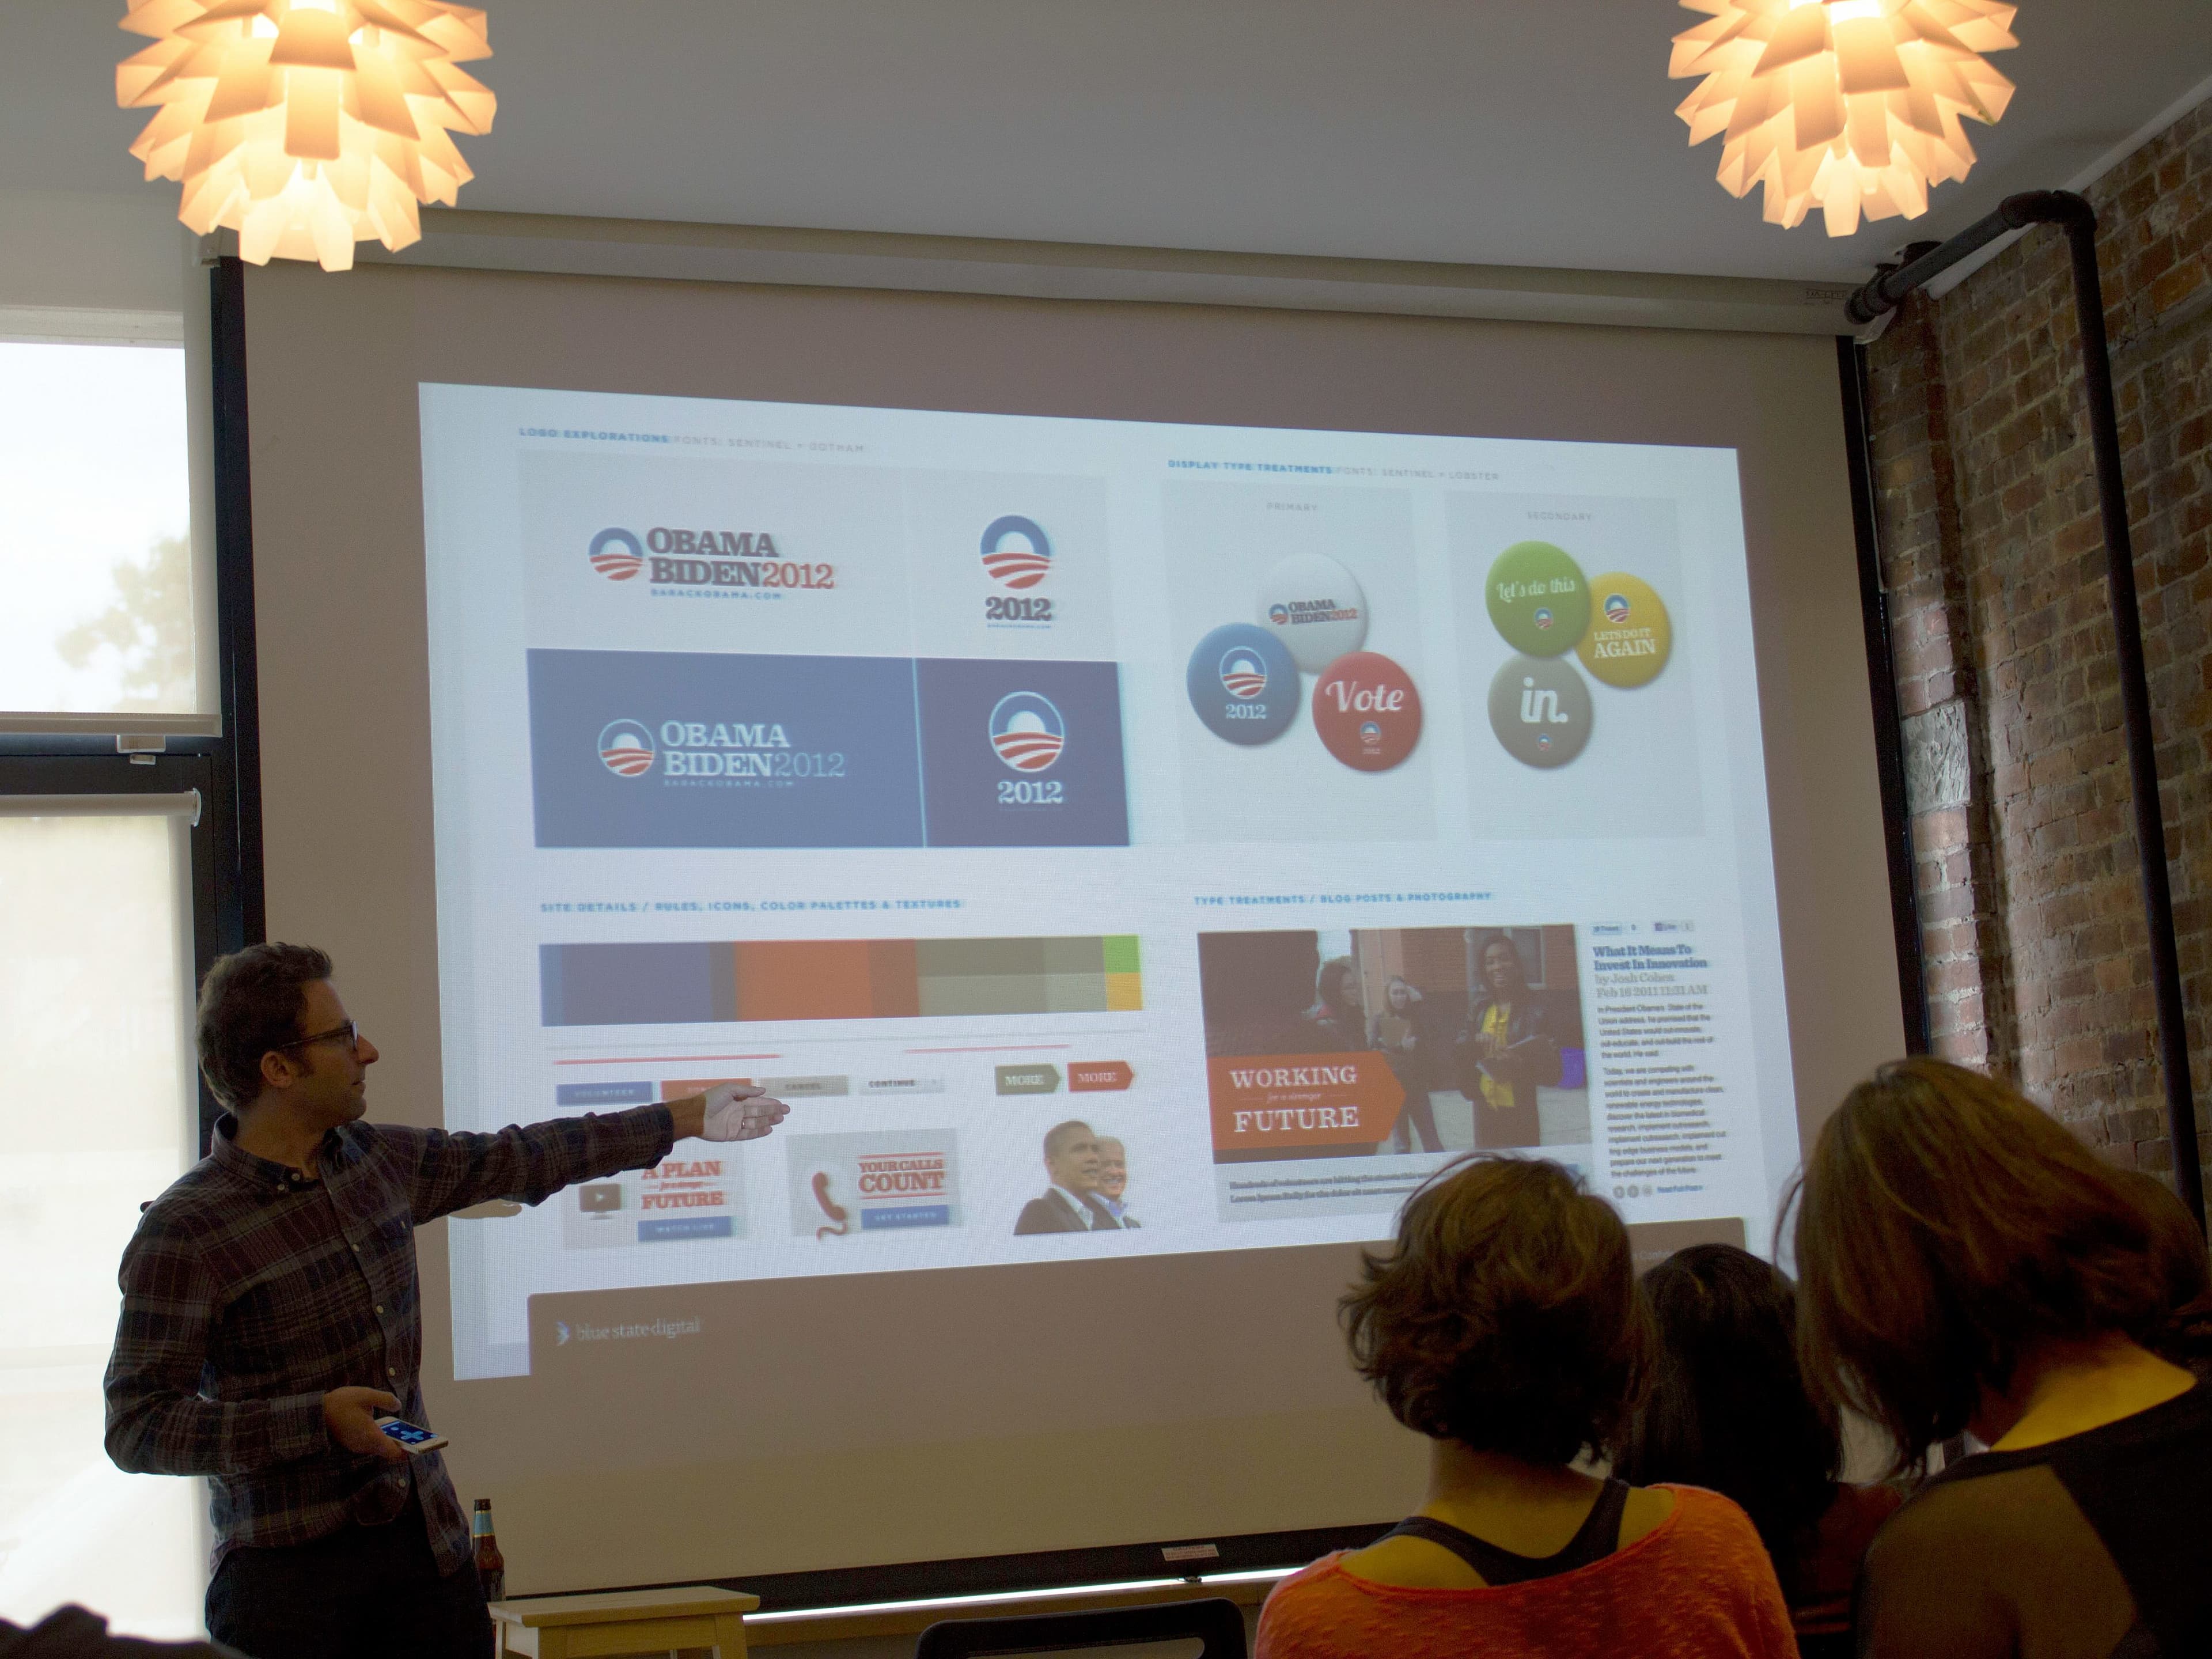 A man standing and pointing at a presentation slide projected on a screen in a dimly lit room. The slide displays various Obama-Biden 2012 campaign logos, color palettes, buttons, and print materials. Several people are sitting and watching him attentively.